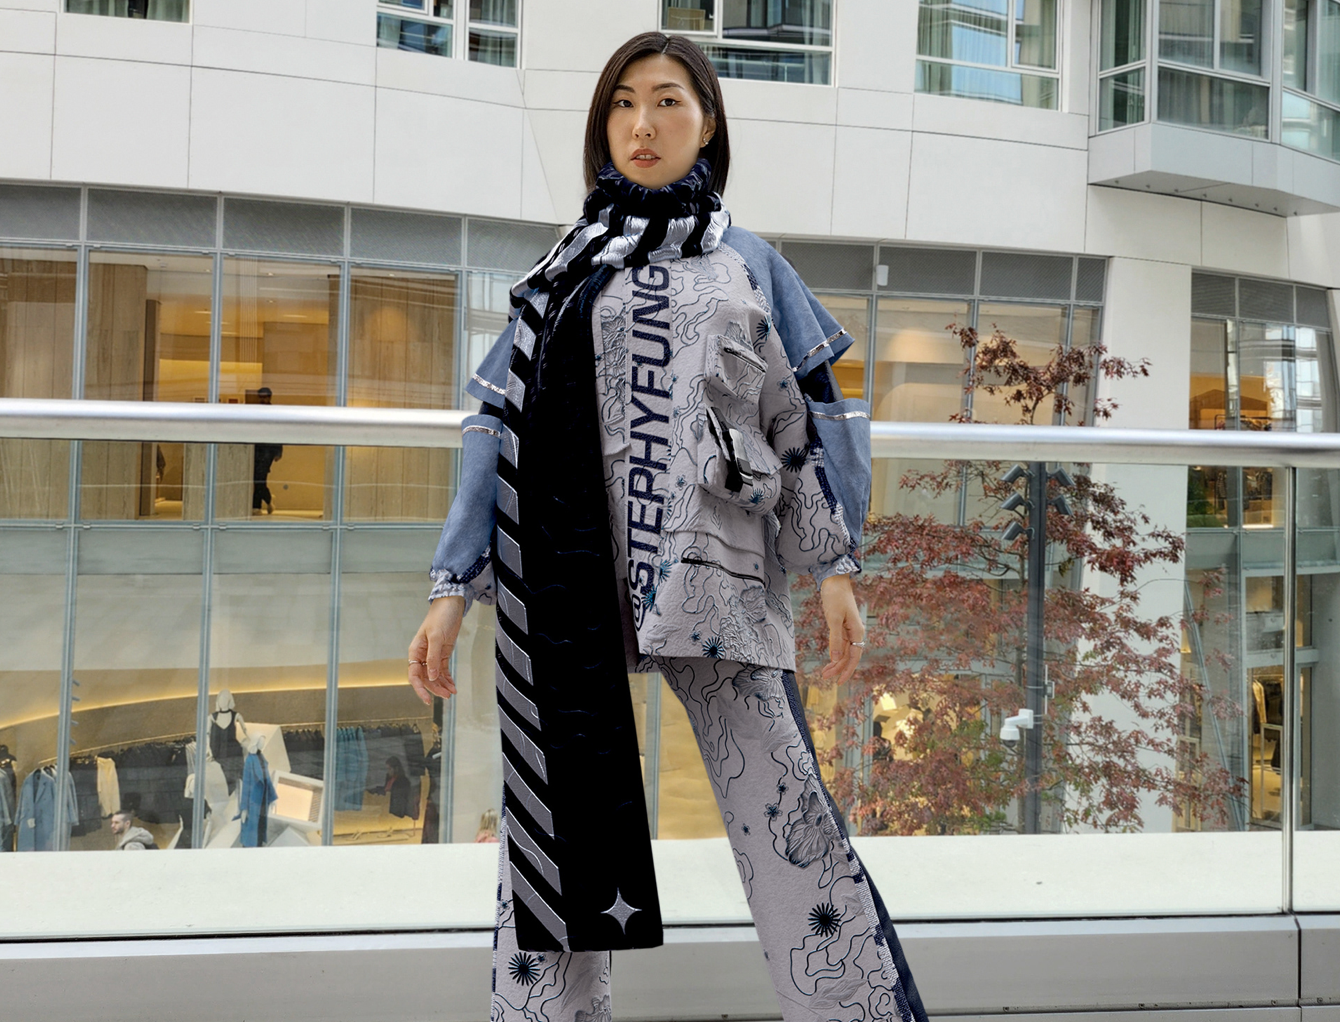 Drawing inspiration from traditional Chinese heritage and her Chinese-British background, digital fashion designer Stephy Fung talks democratizing the virtual space and demystifying the creative process. Photo: Stephy Fung